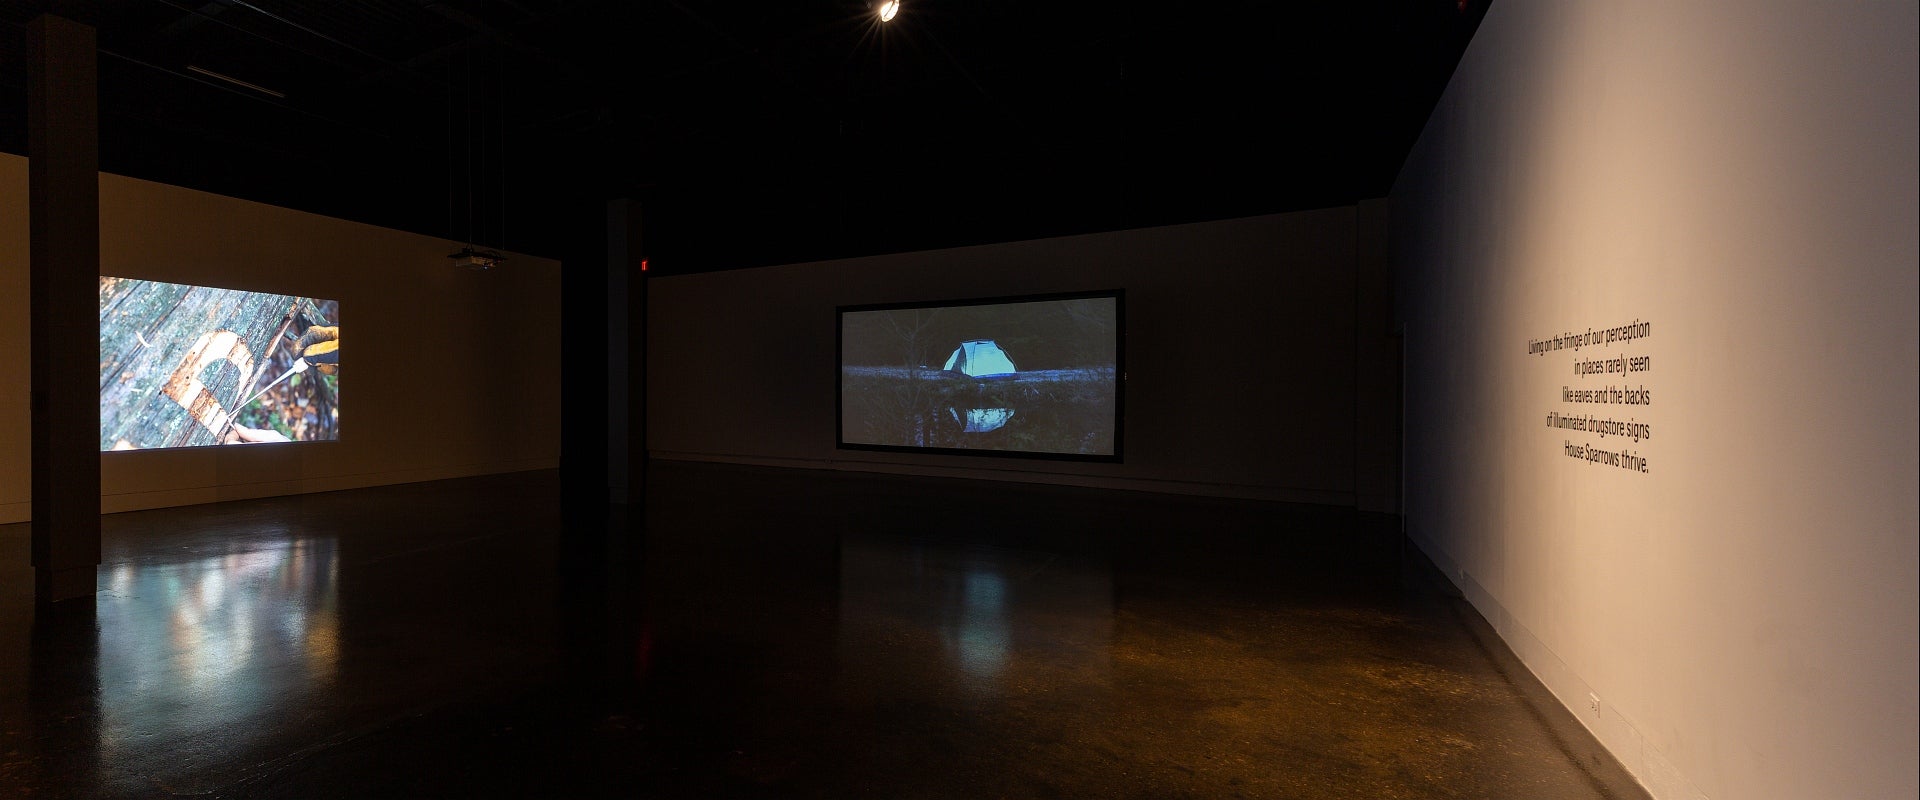 Video exhibition in dark gallery.  Video on left shows hands carving letter "D", back wall video of glowing blue tent by water.